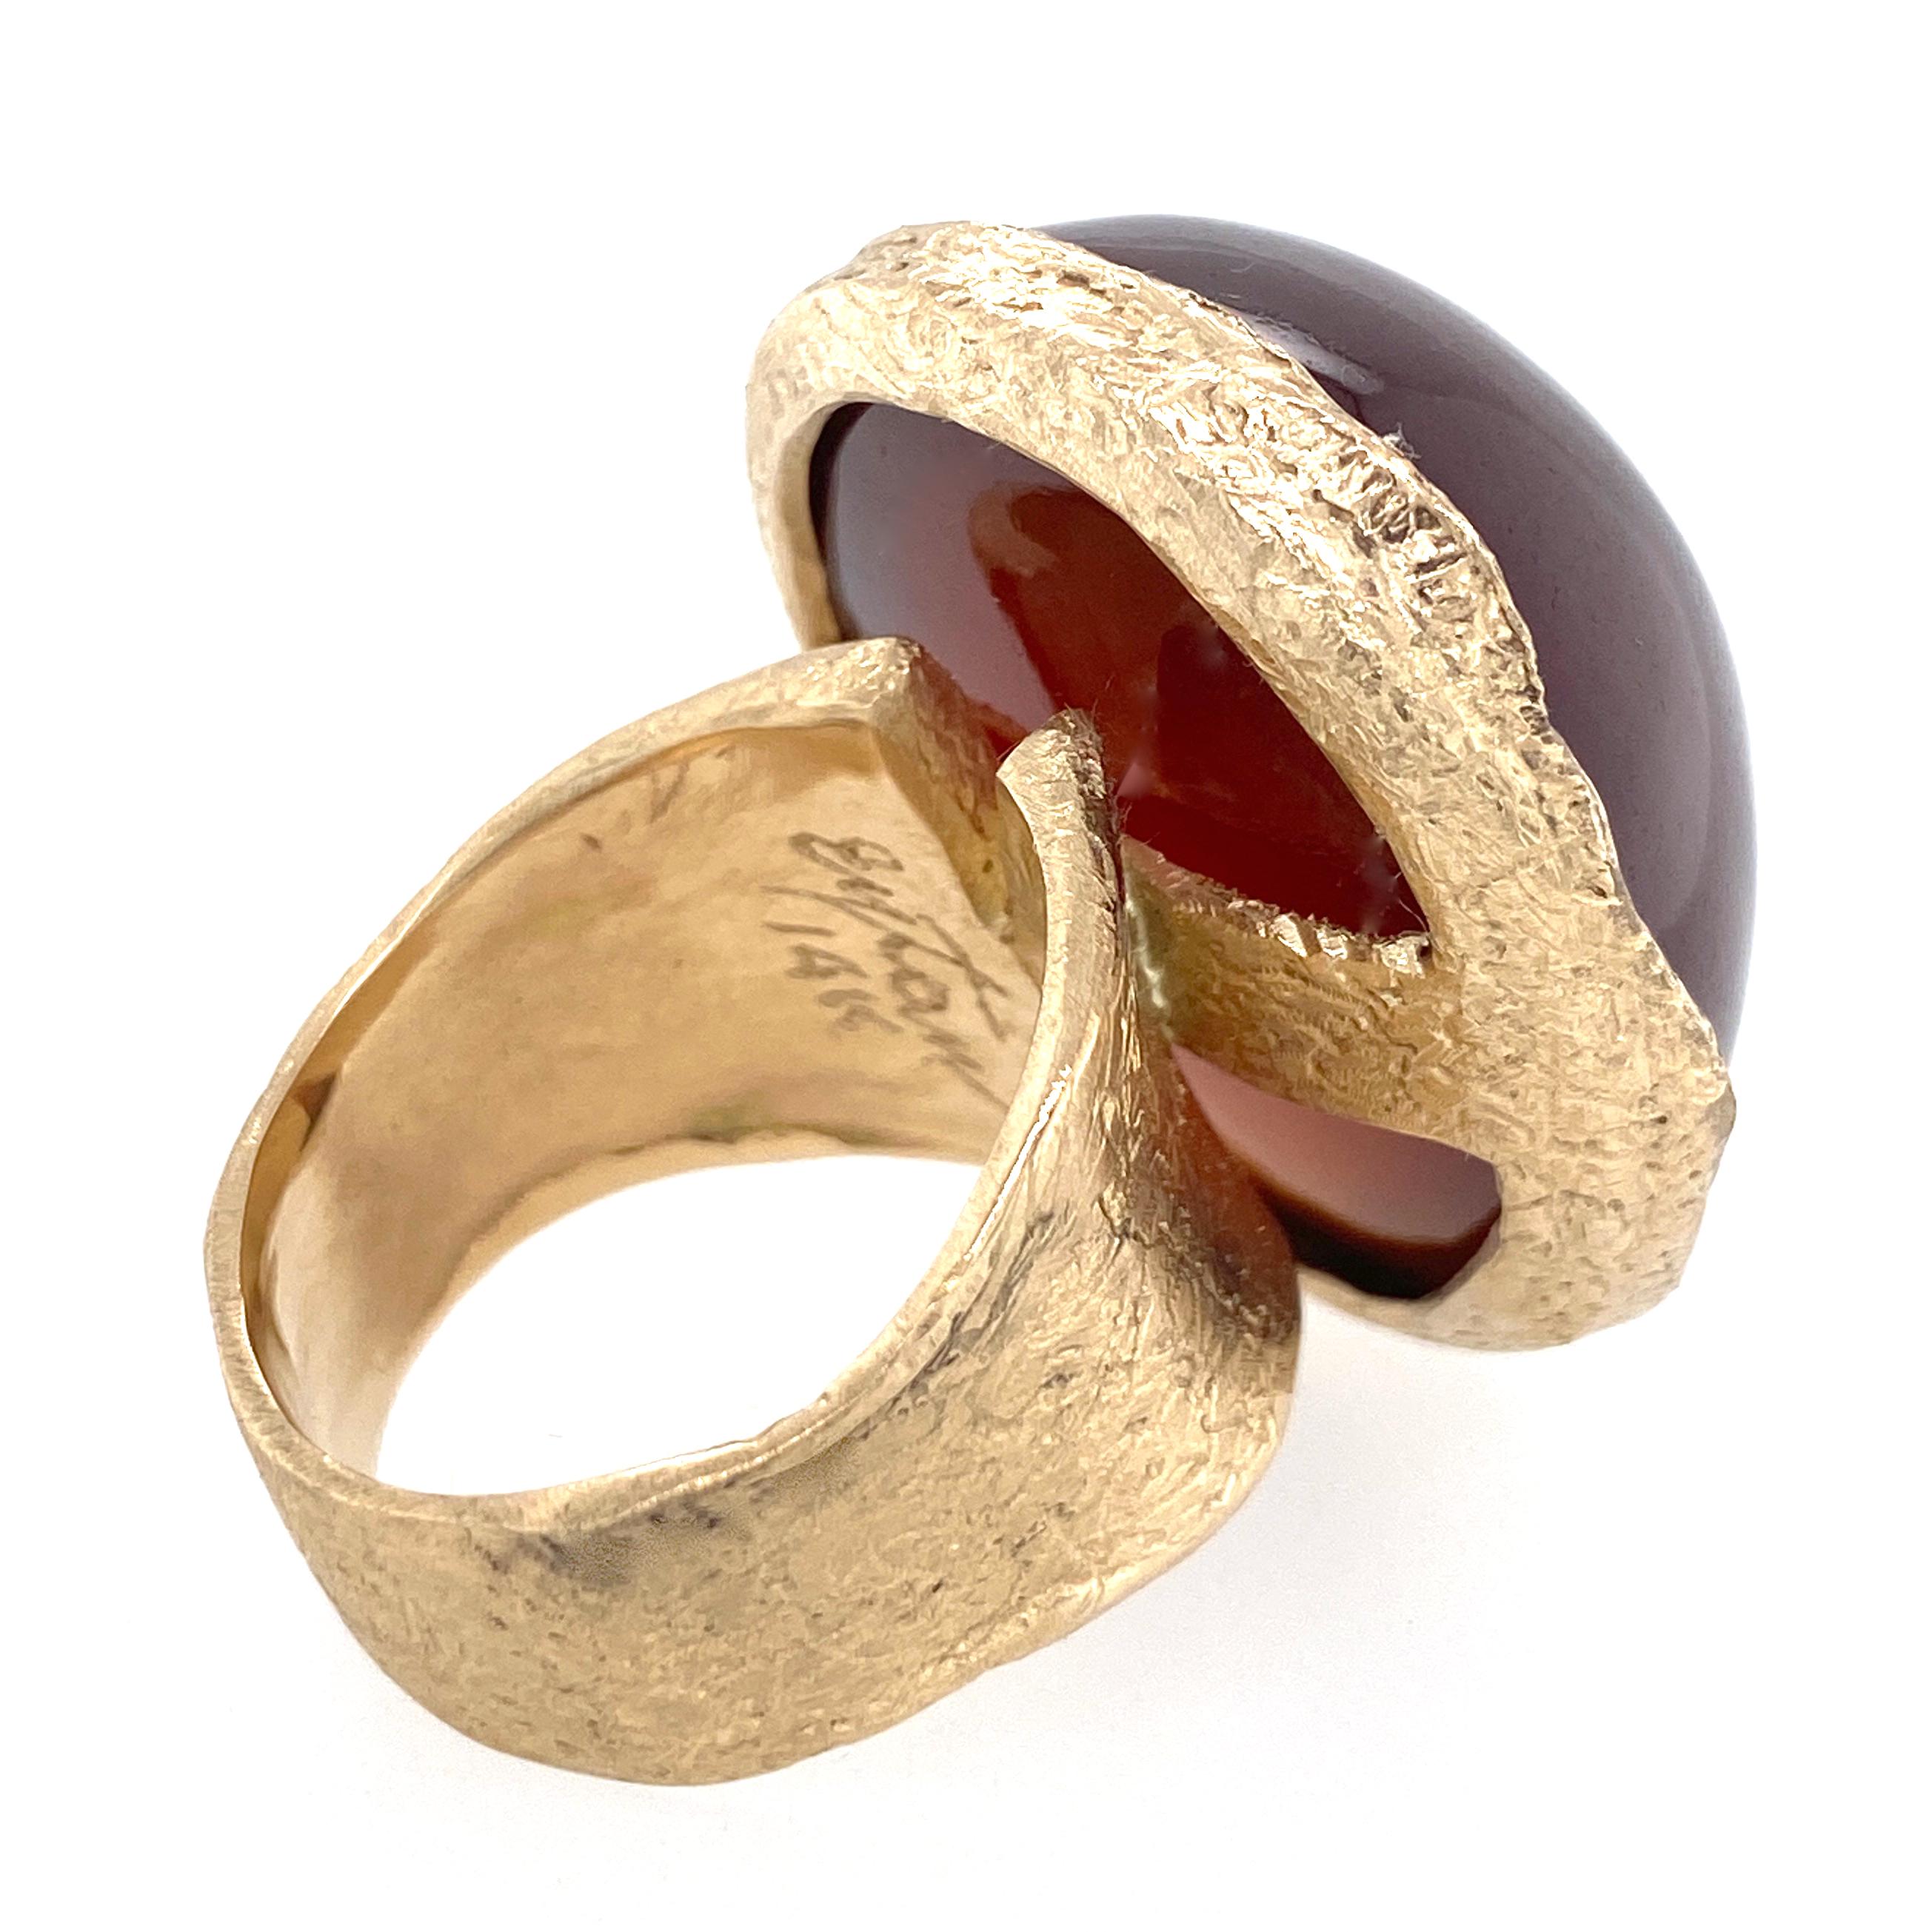 Oversized Modern Cocktail Ring with 95 Carat Almandine Garnet in Yellow Gold 7